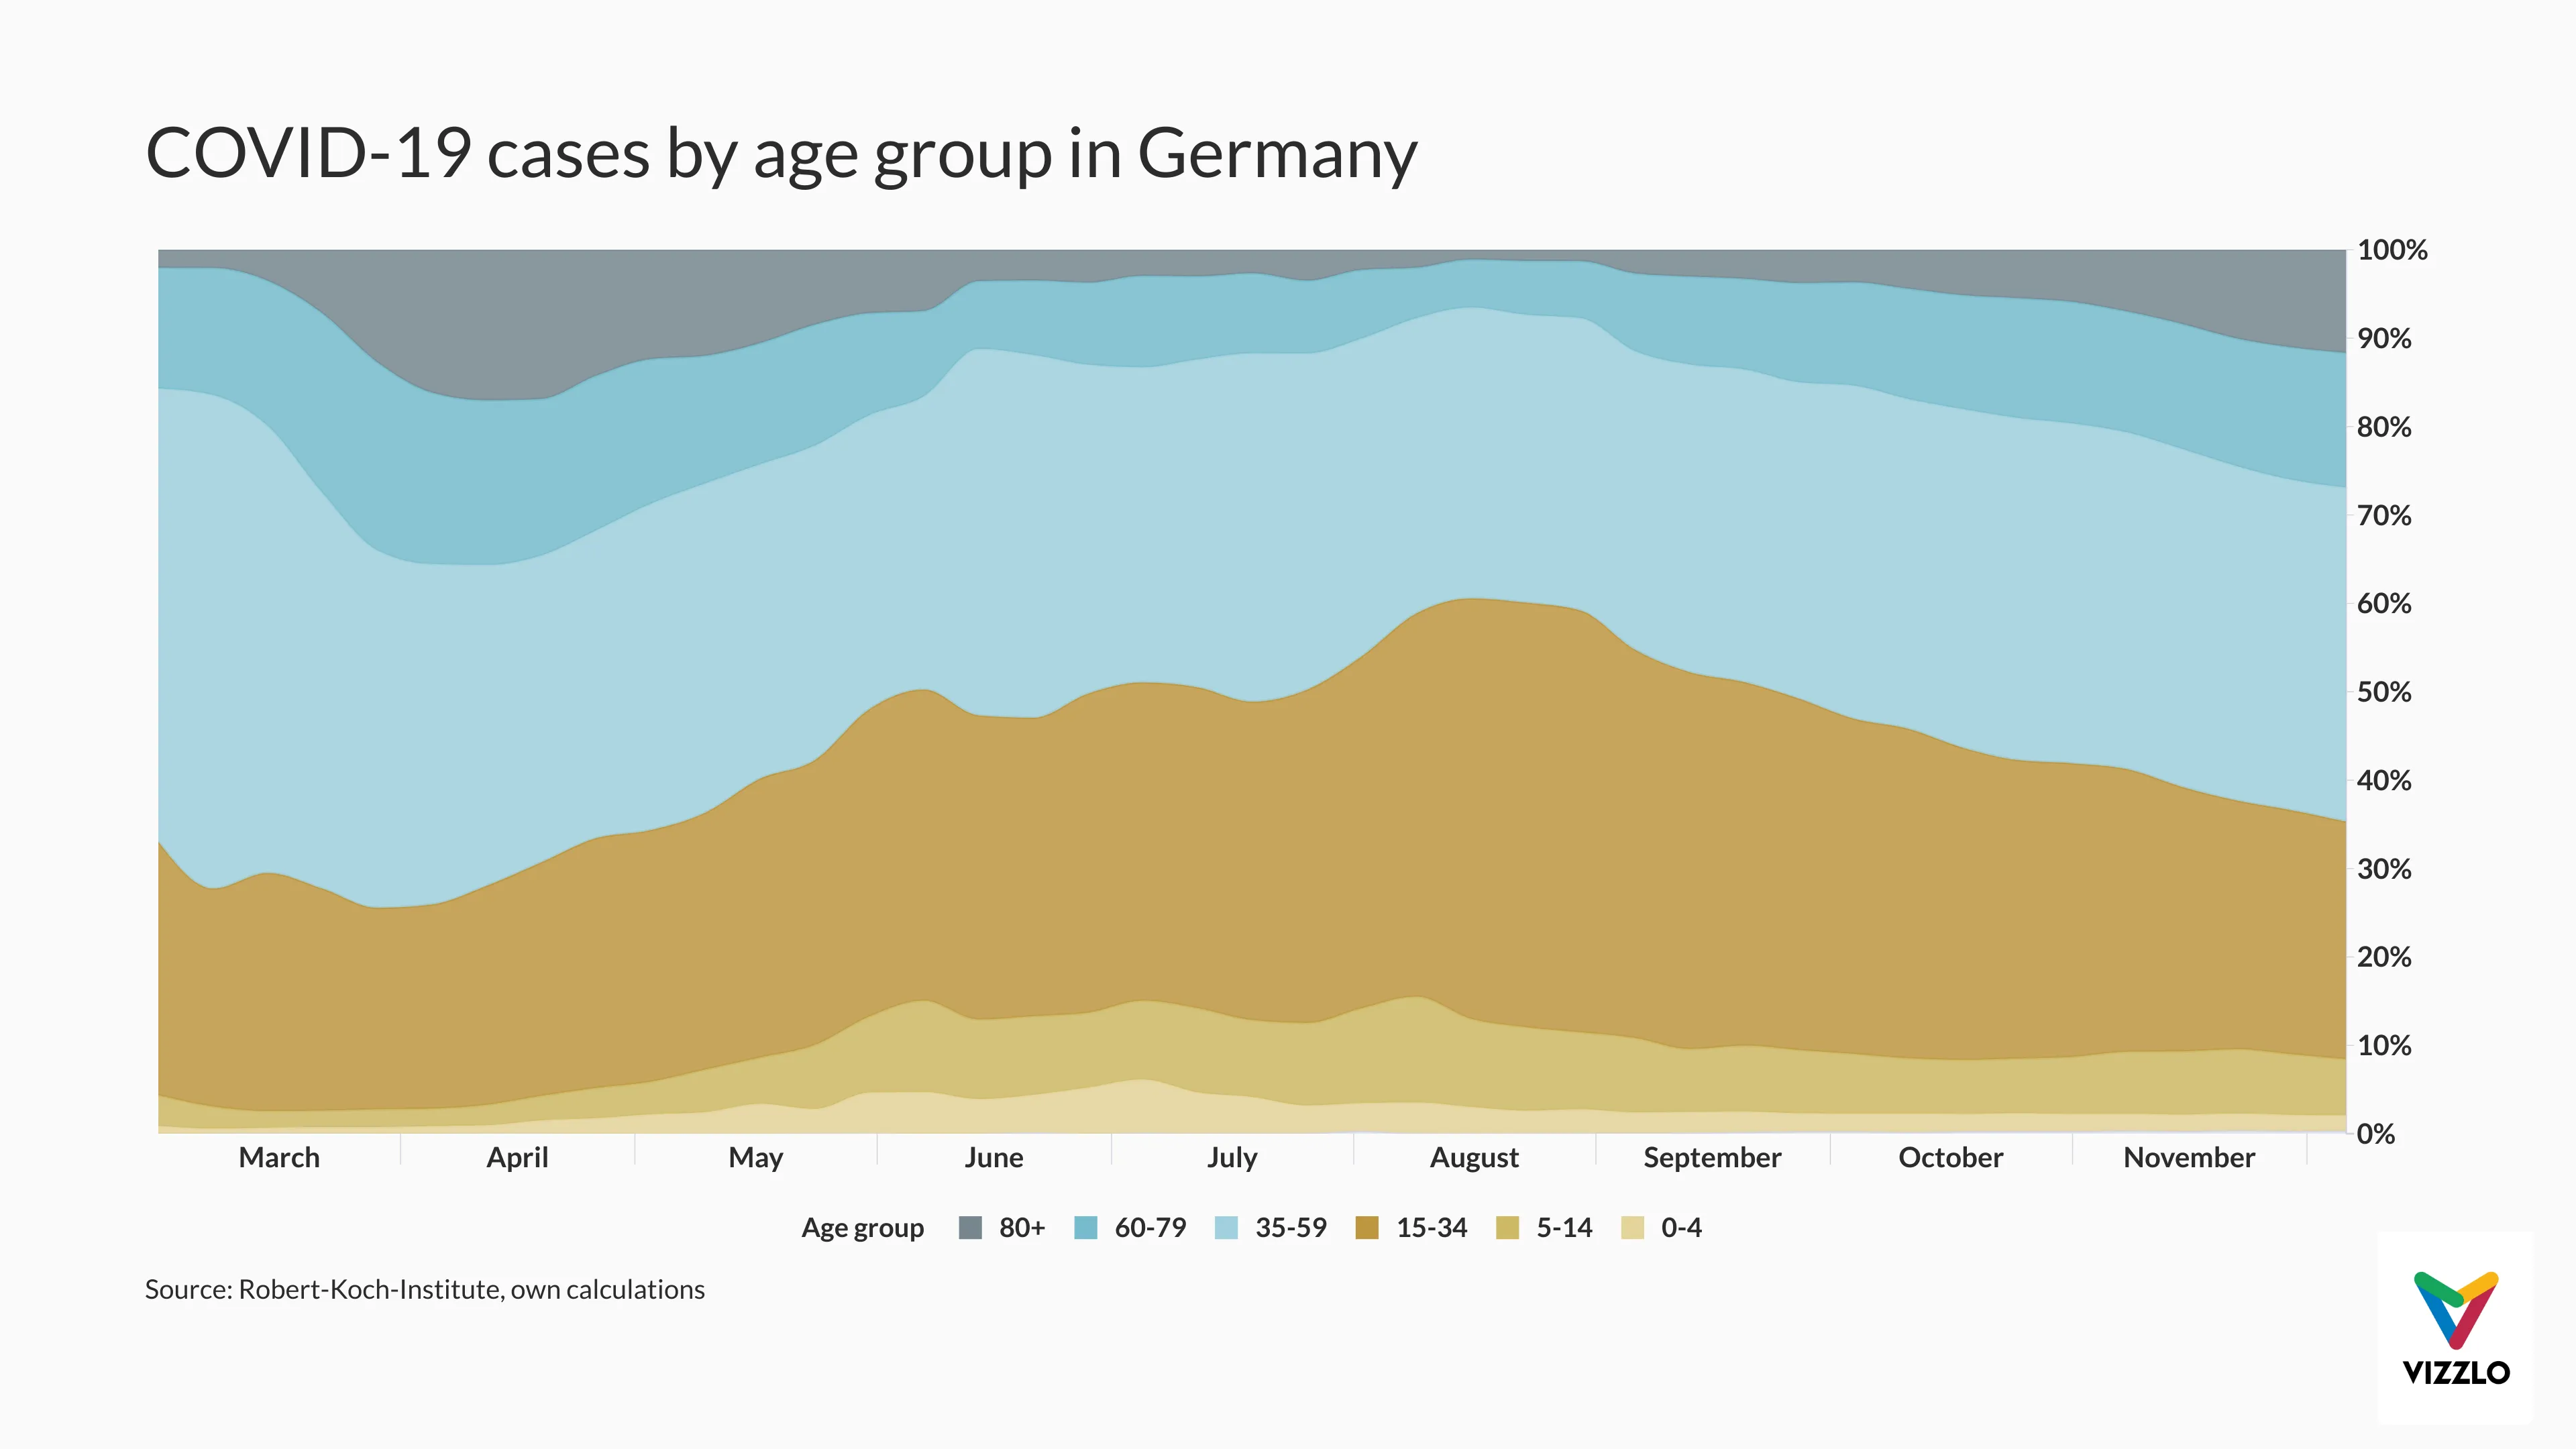 COVID-19 cases by age group in Germany